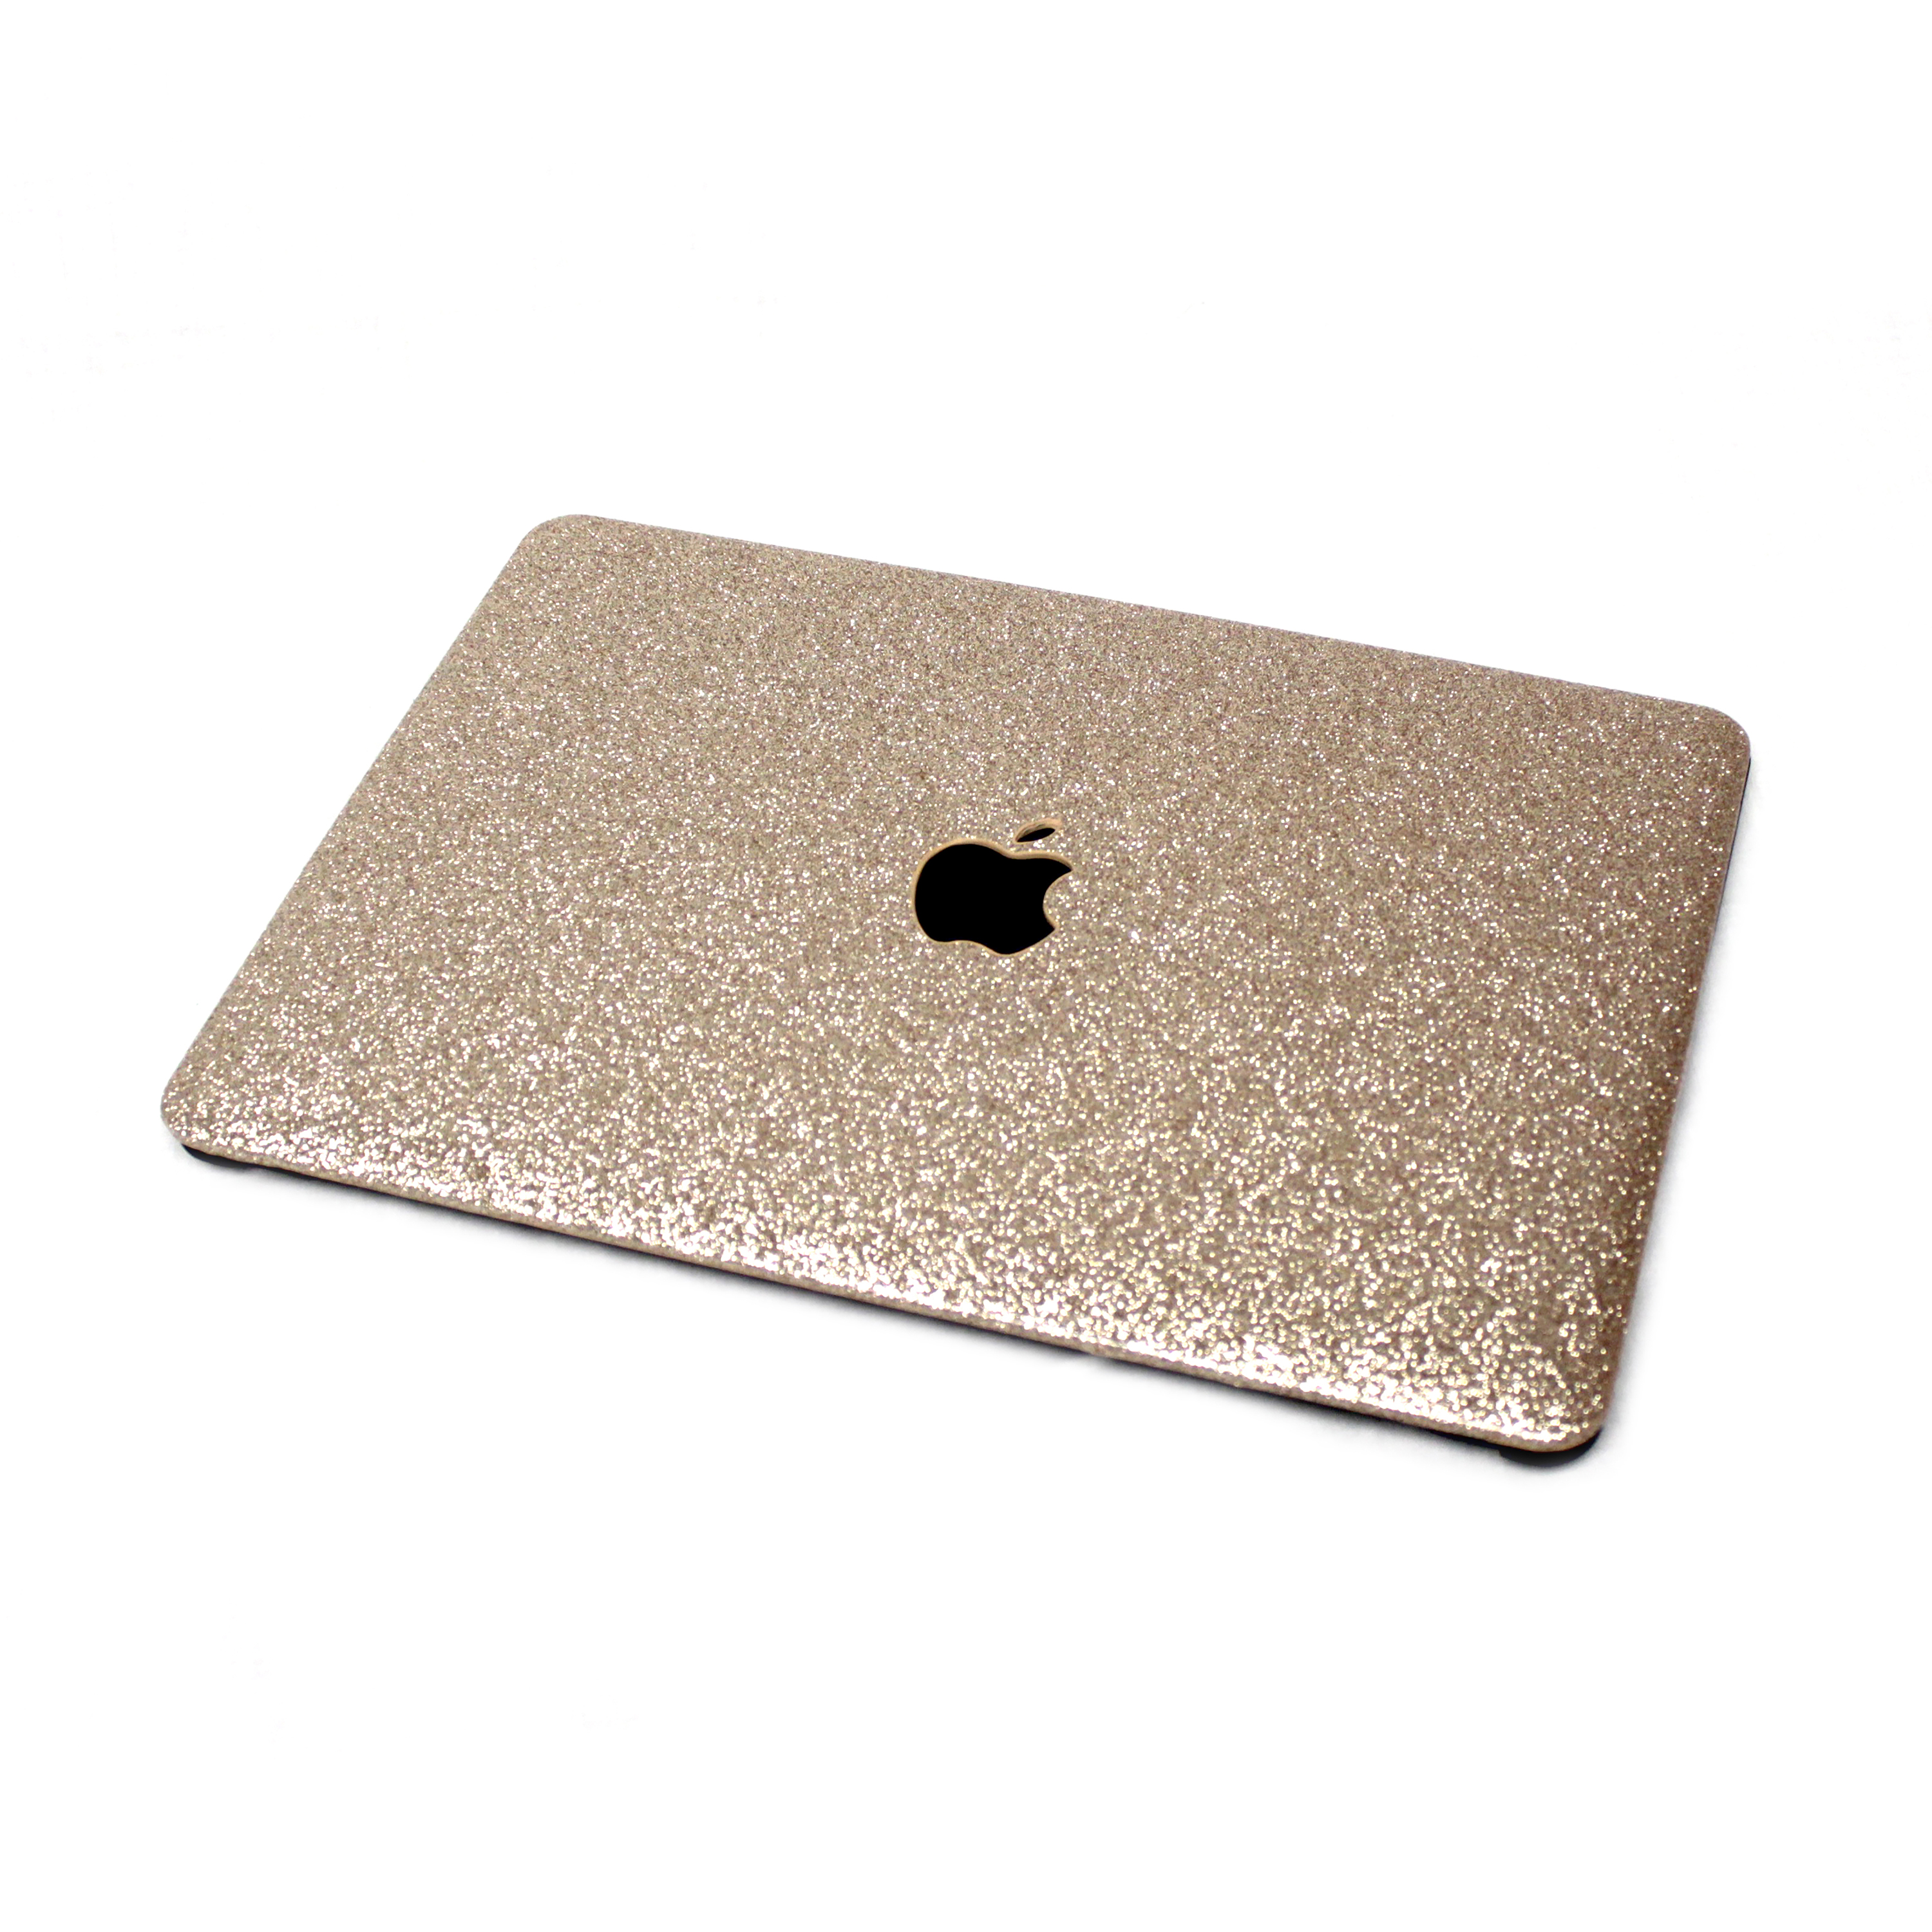 Wonder Wild Case For MacBook Air 13 inch Pro 15 2019 2018 Retina 12 11 Apple Hard Mac Protective Cover Touch Bar 2017 2016 2015 Plastic Laptop Print Old Radio Fashioned Retro Vintage 70s Music Gold 